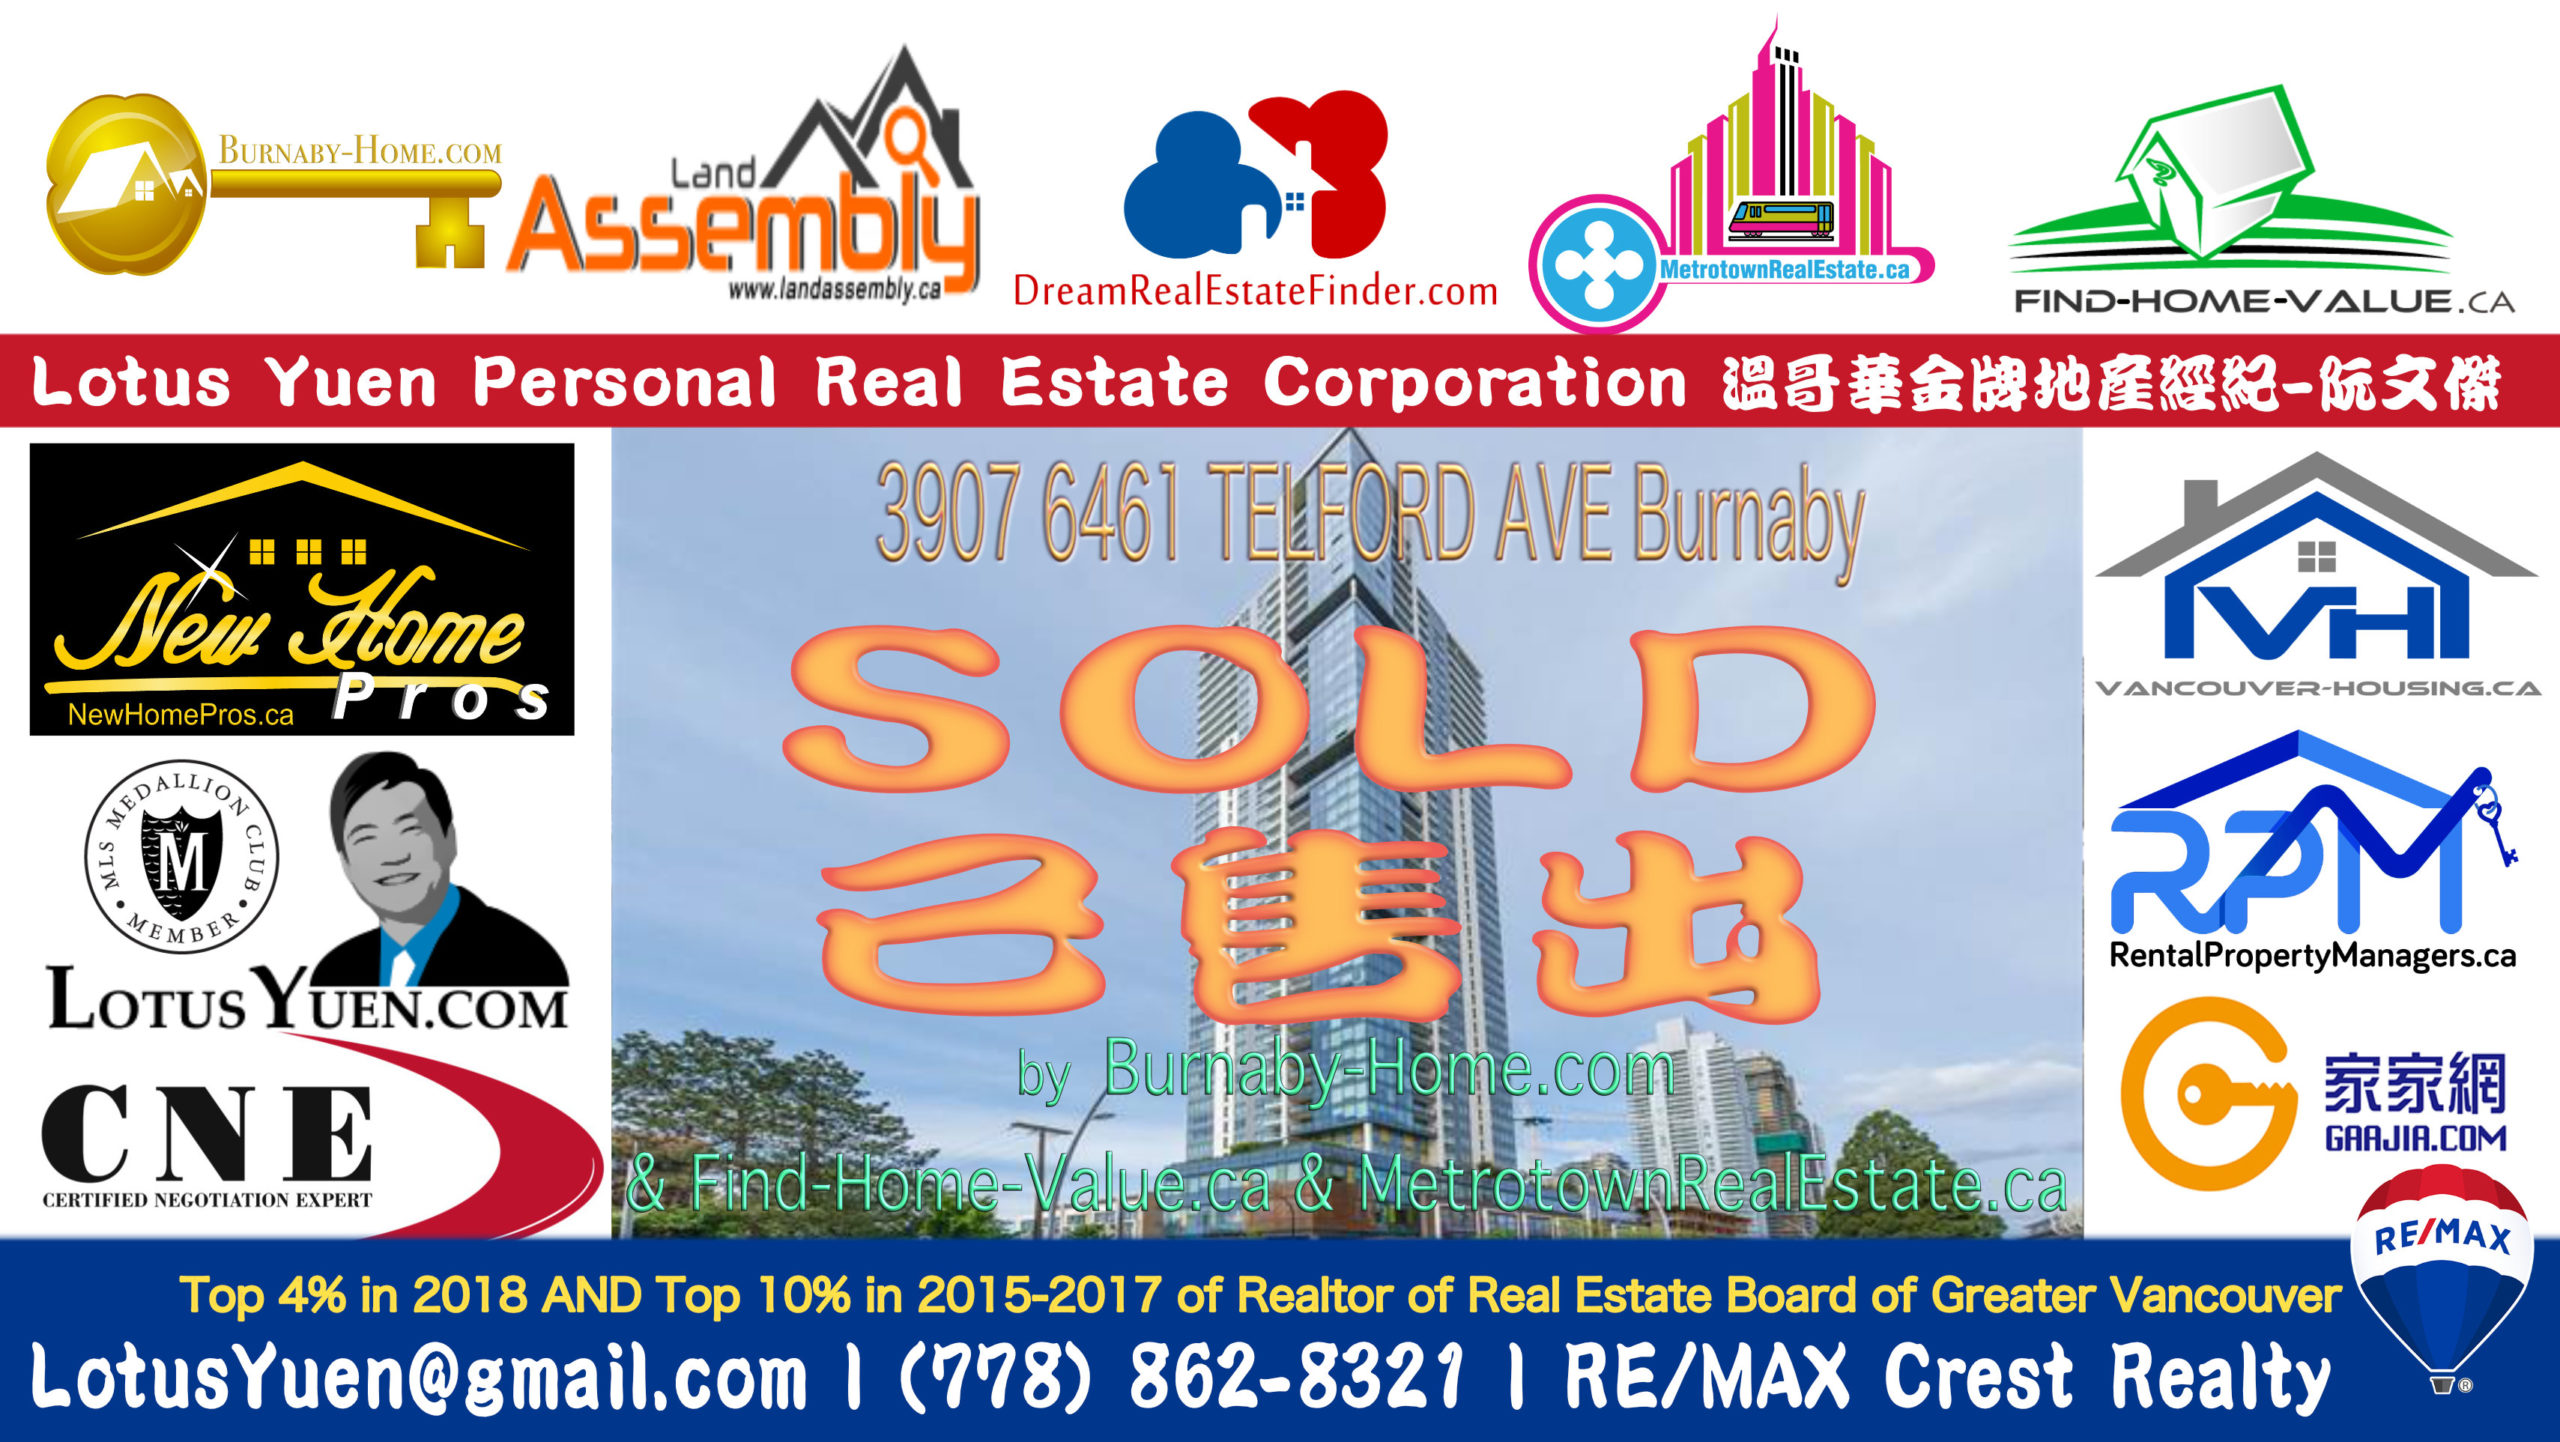 SOLD - 3907 6461 TELFORD AVE Burnaby